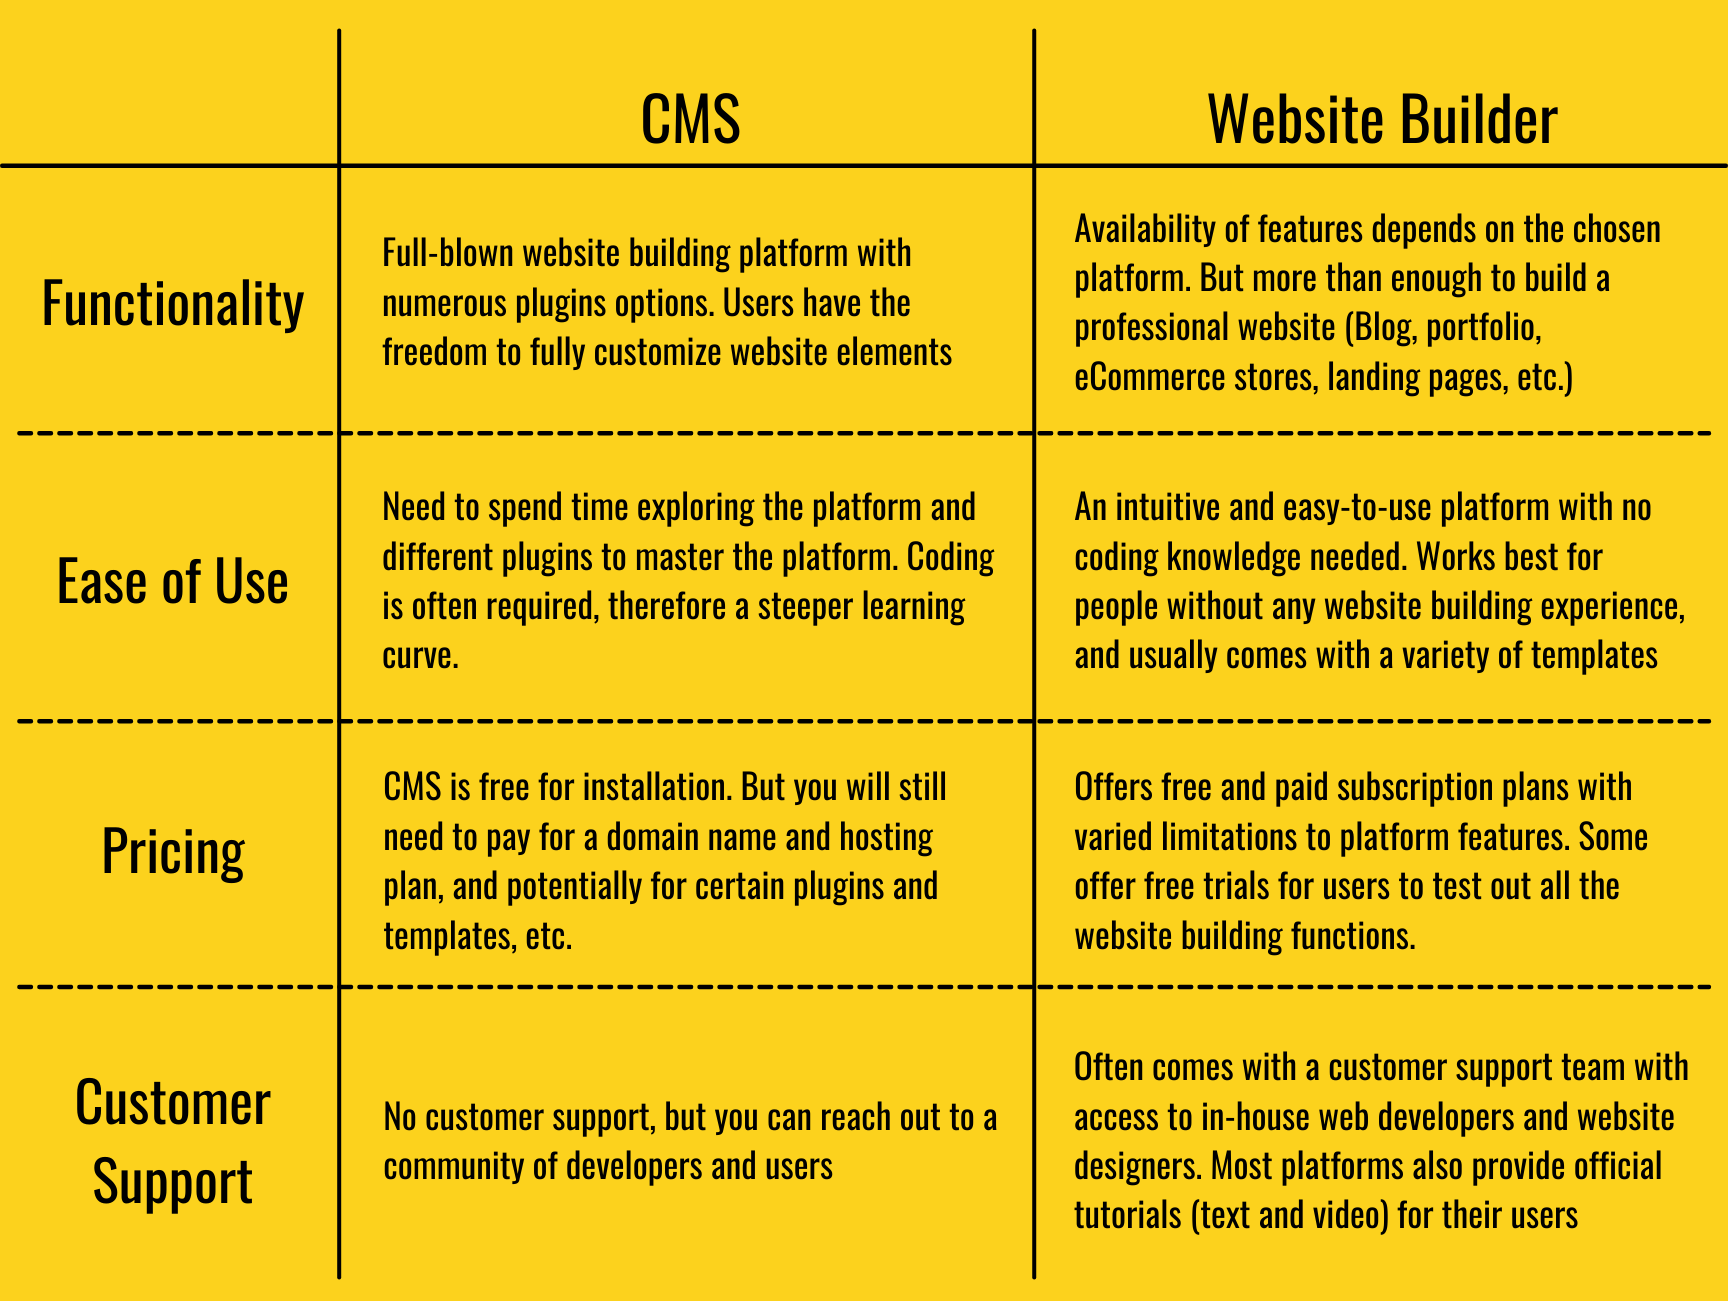 Difference between CMS and Website Builder